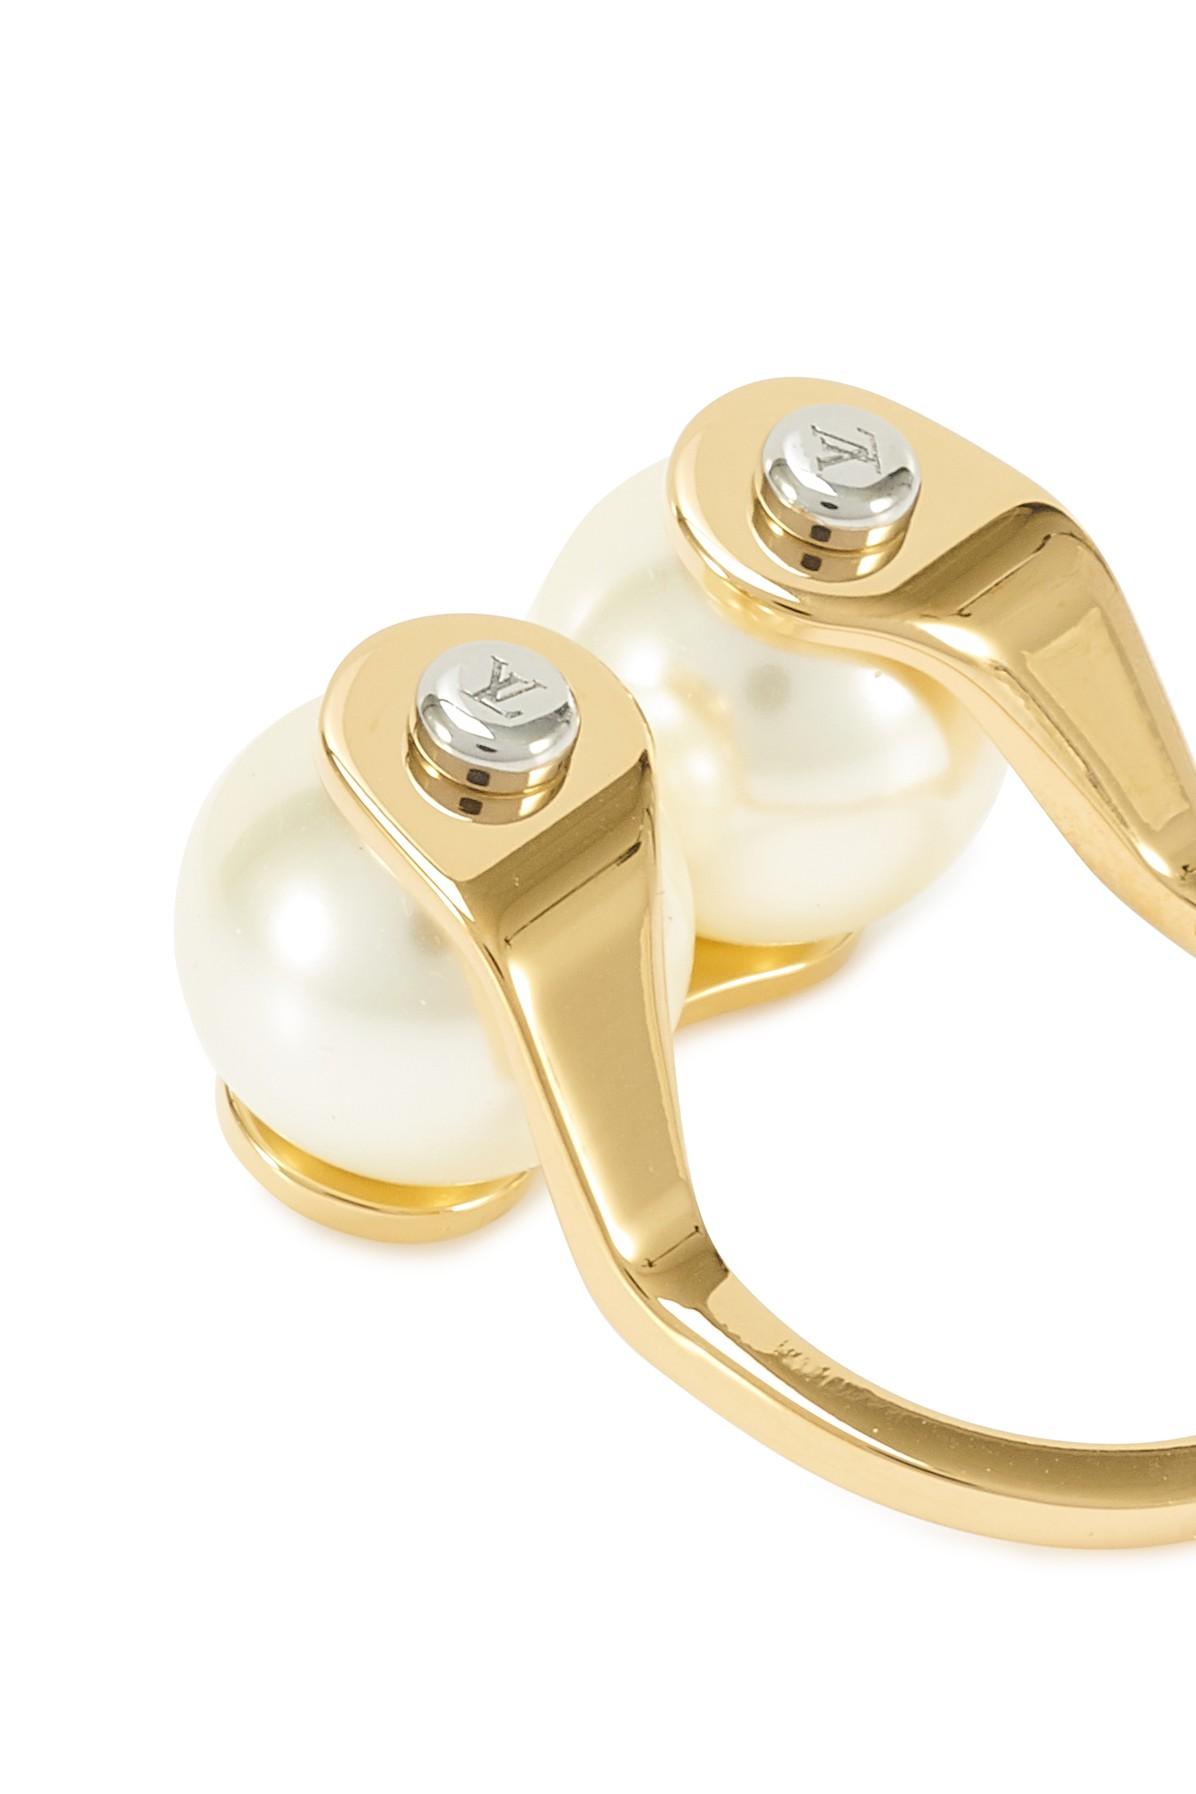 Louis Vuitton Ring・LV Eclipse Pearl Size Approximately No. 13 M1080M Metal Resin Pearl